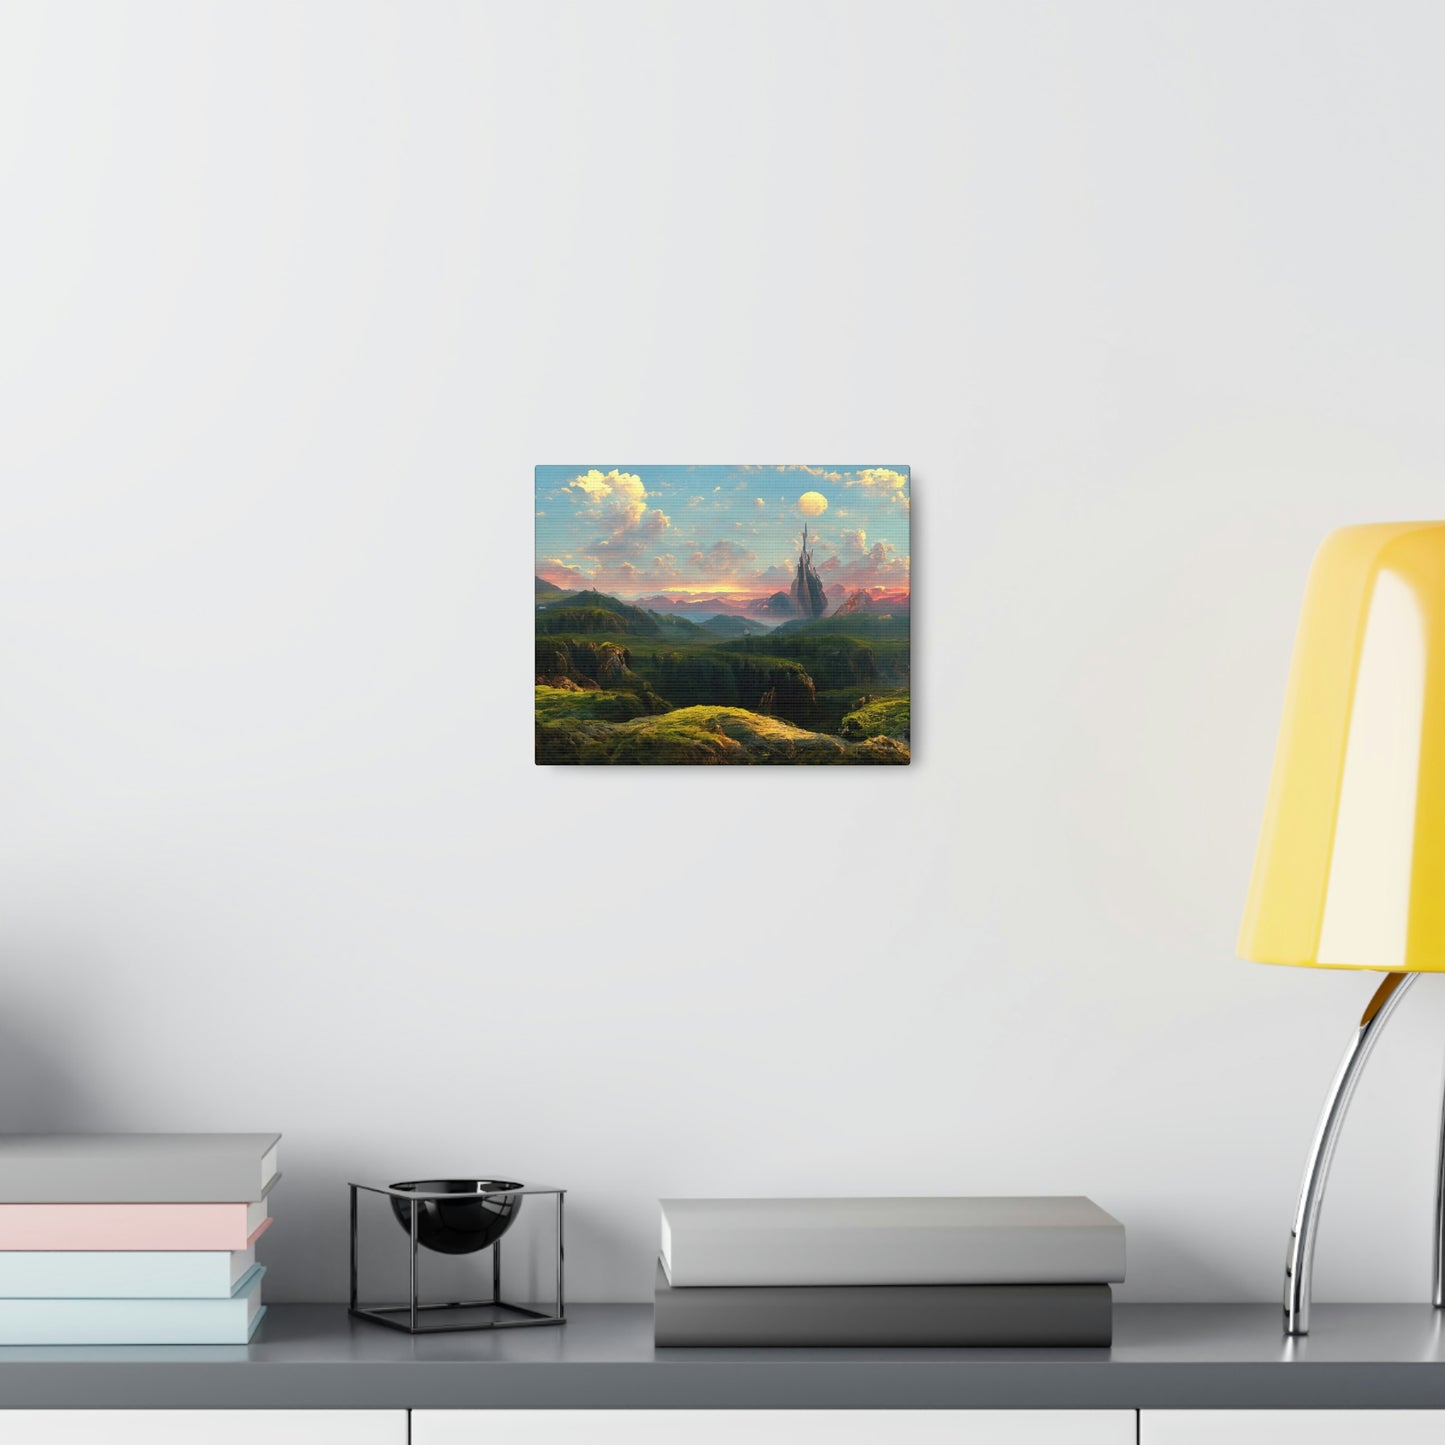 Sunset Behind an Impossible View - Canvas